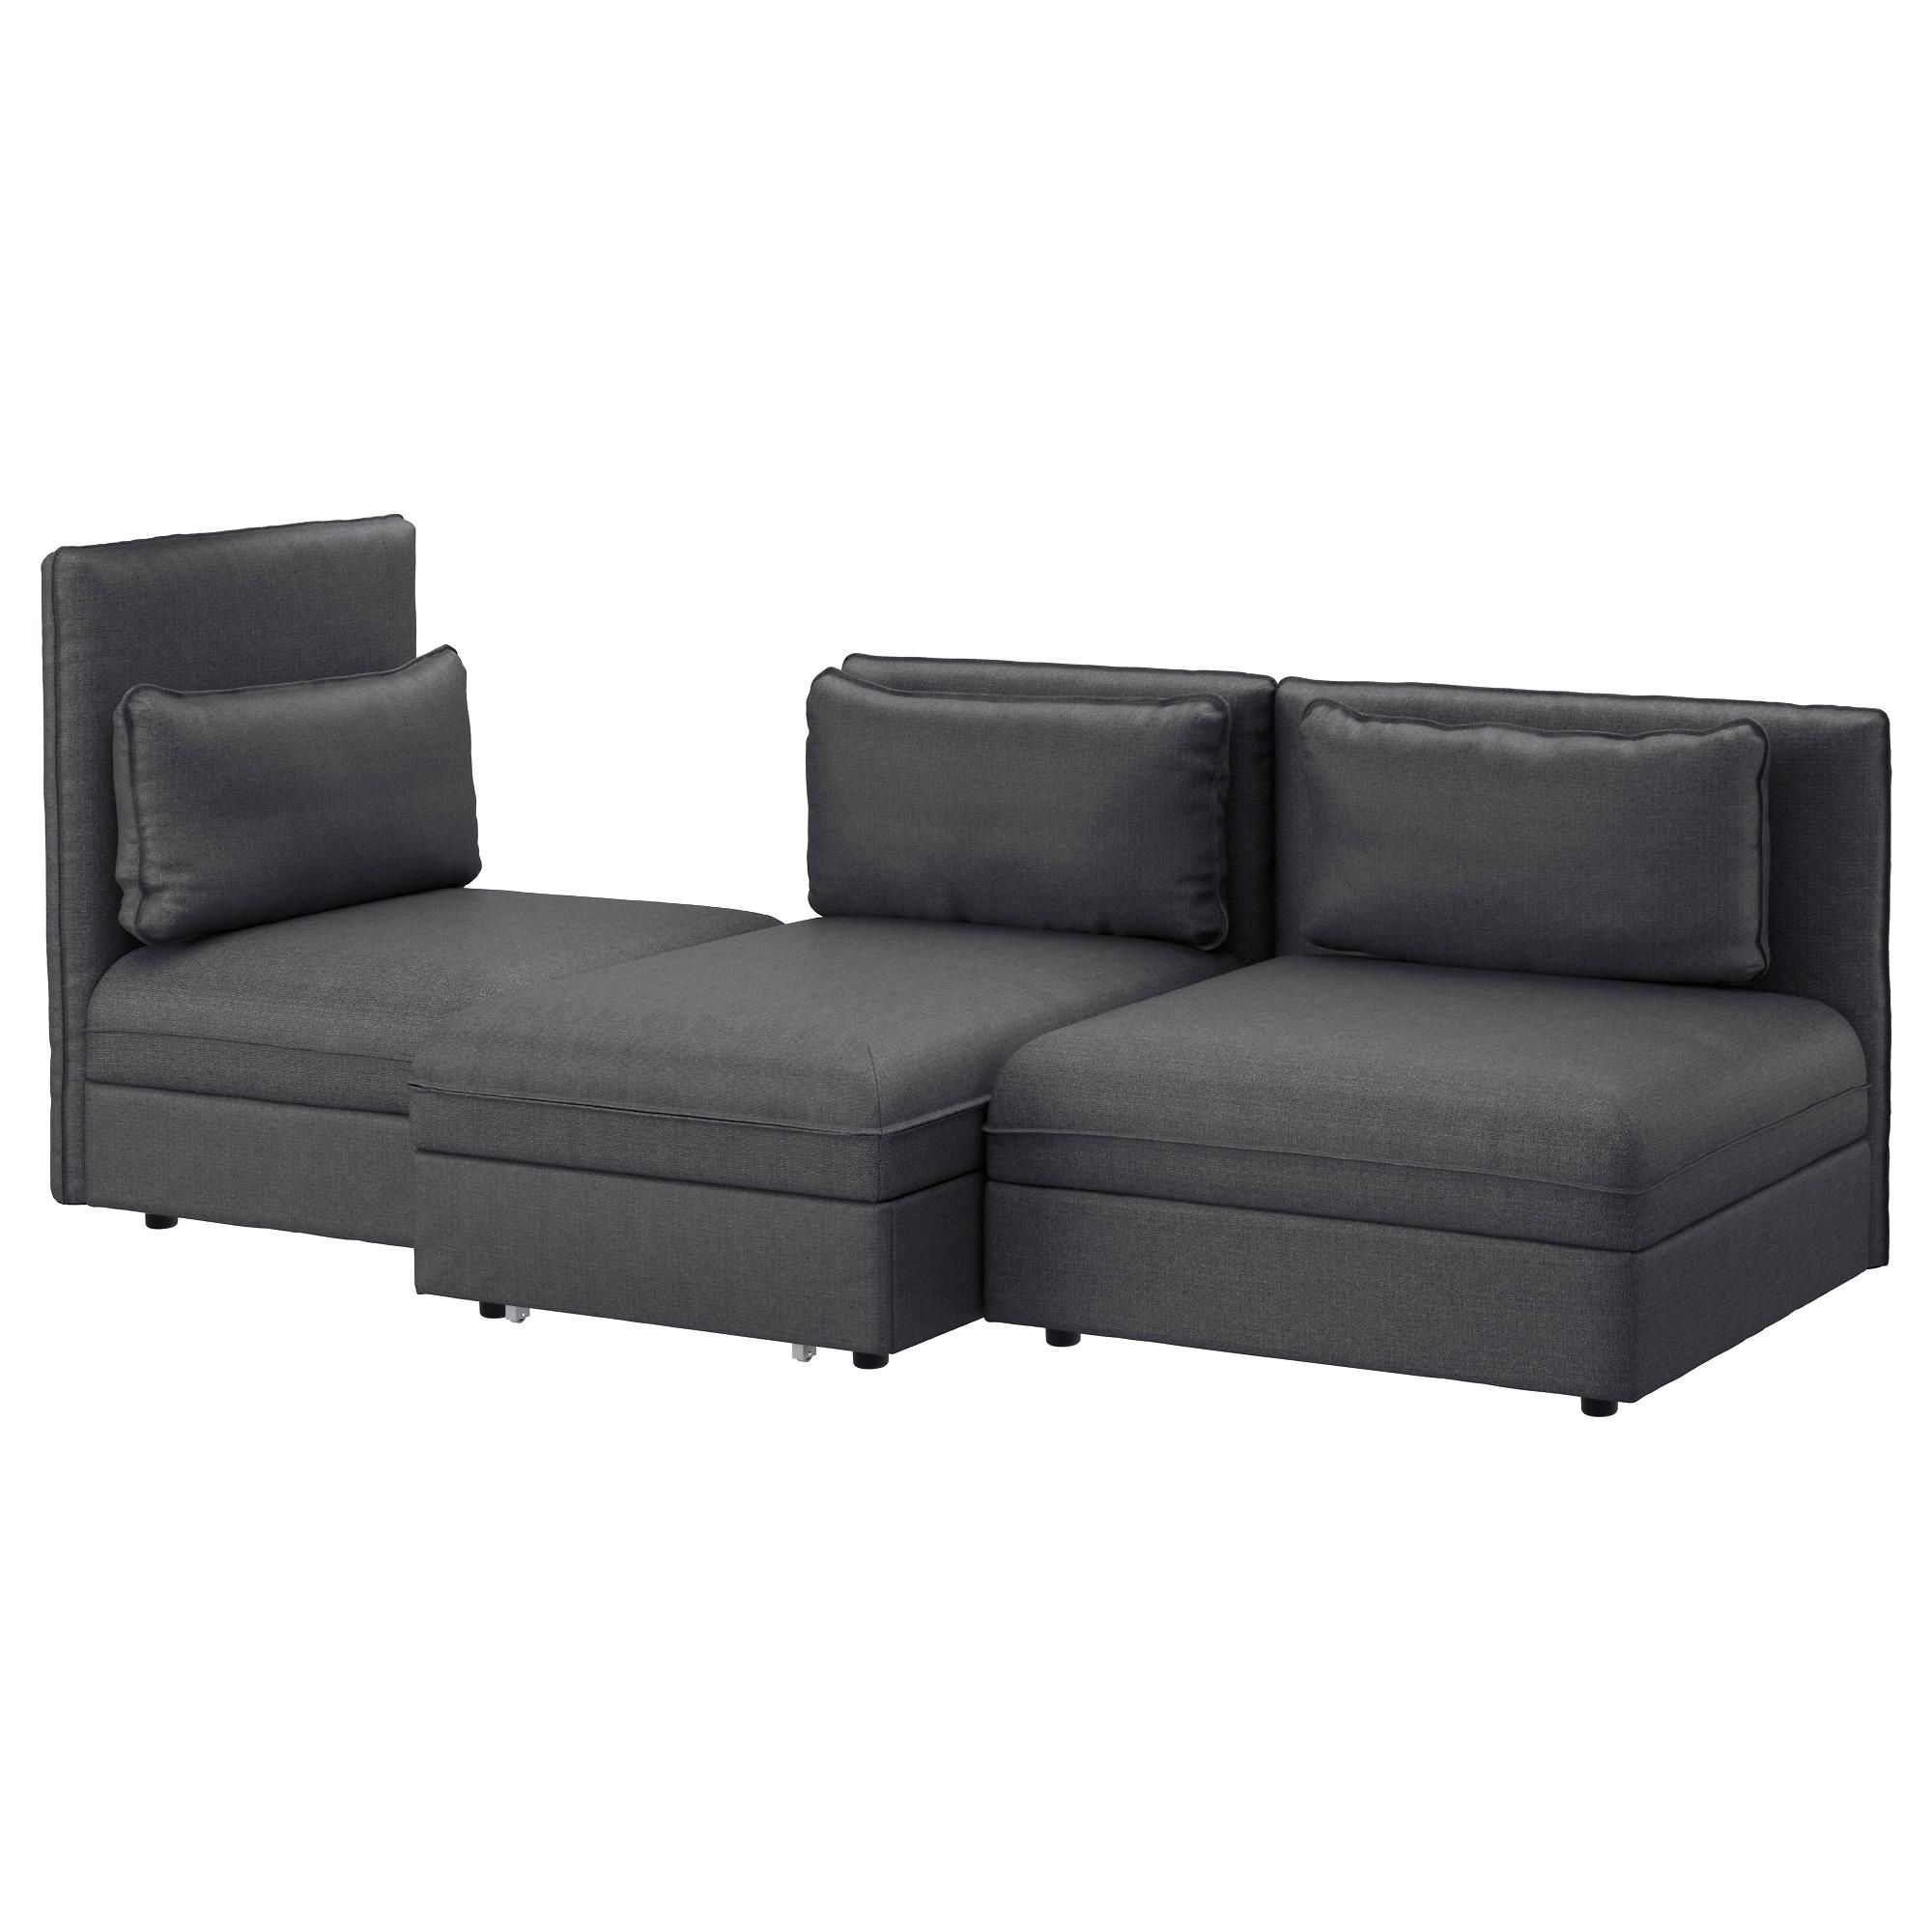 Vallentuna Collection With Ikea Single Sofa Beds (View 16 of 23)